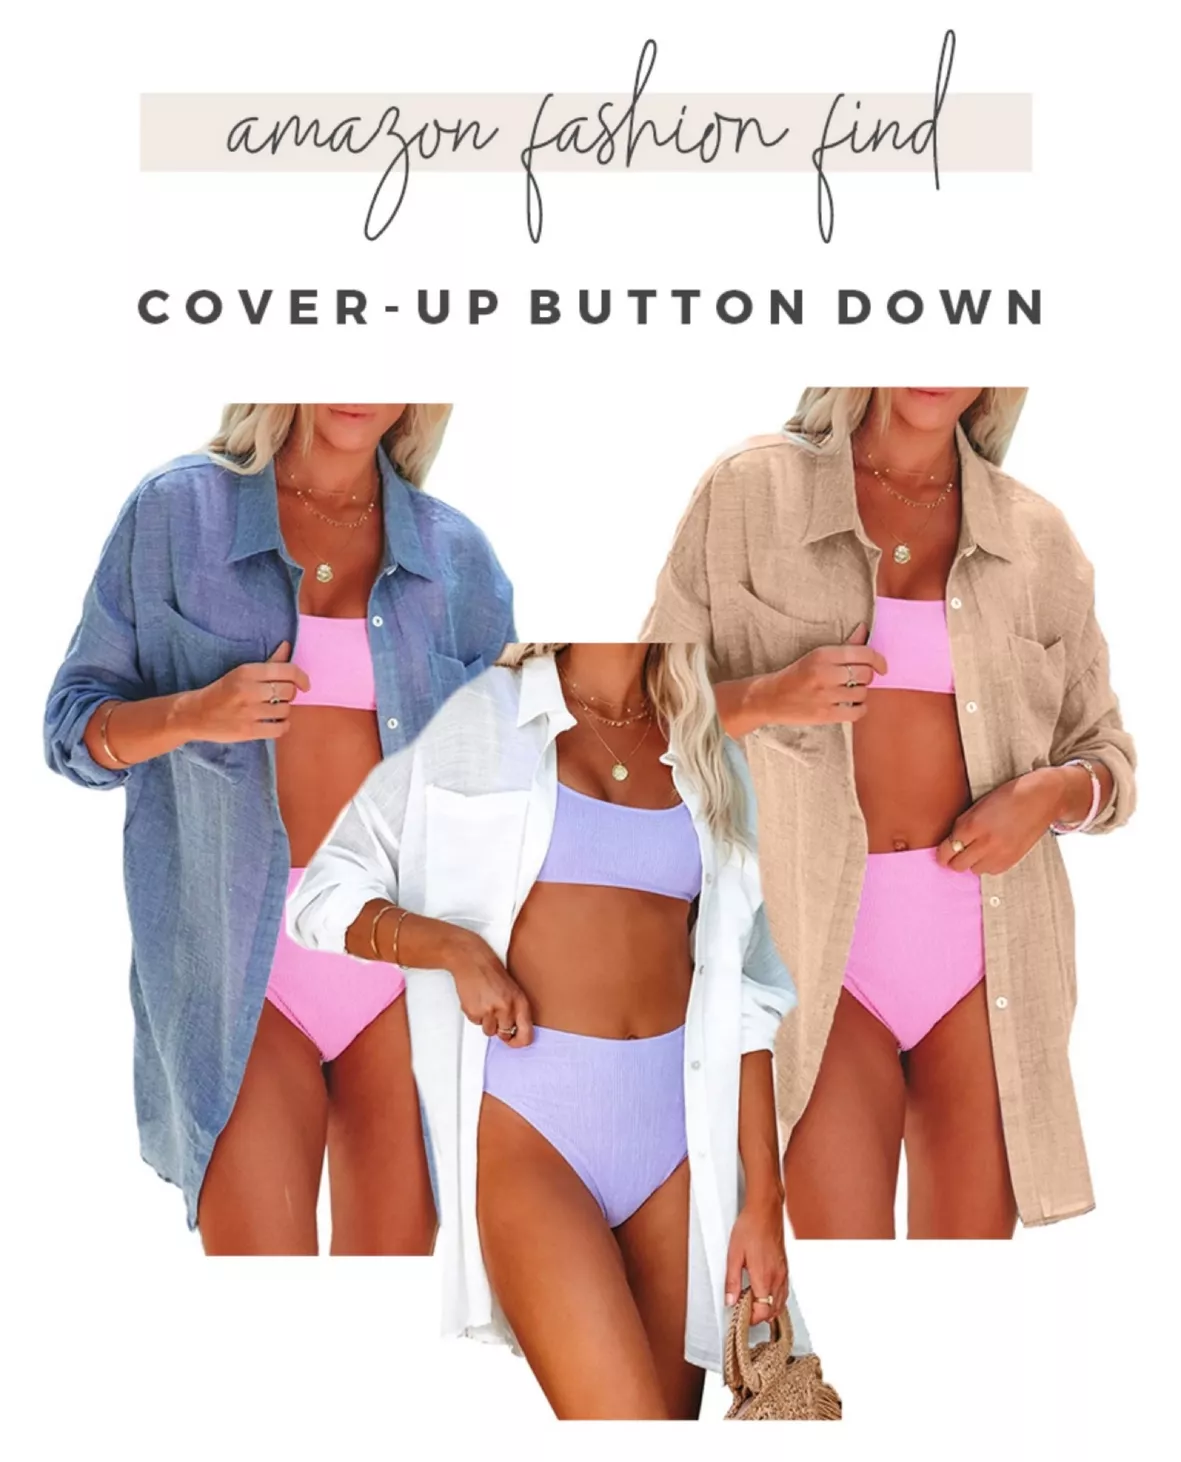 Womens Cotton Button Down Long Sleeve Shirts Bathing Suit Cover